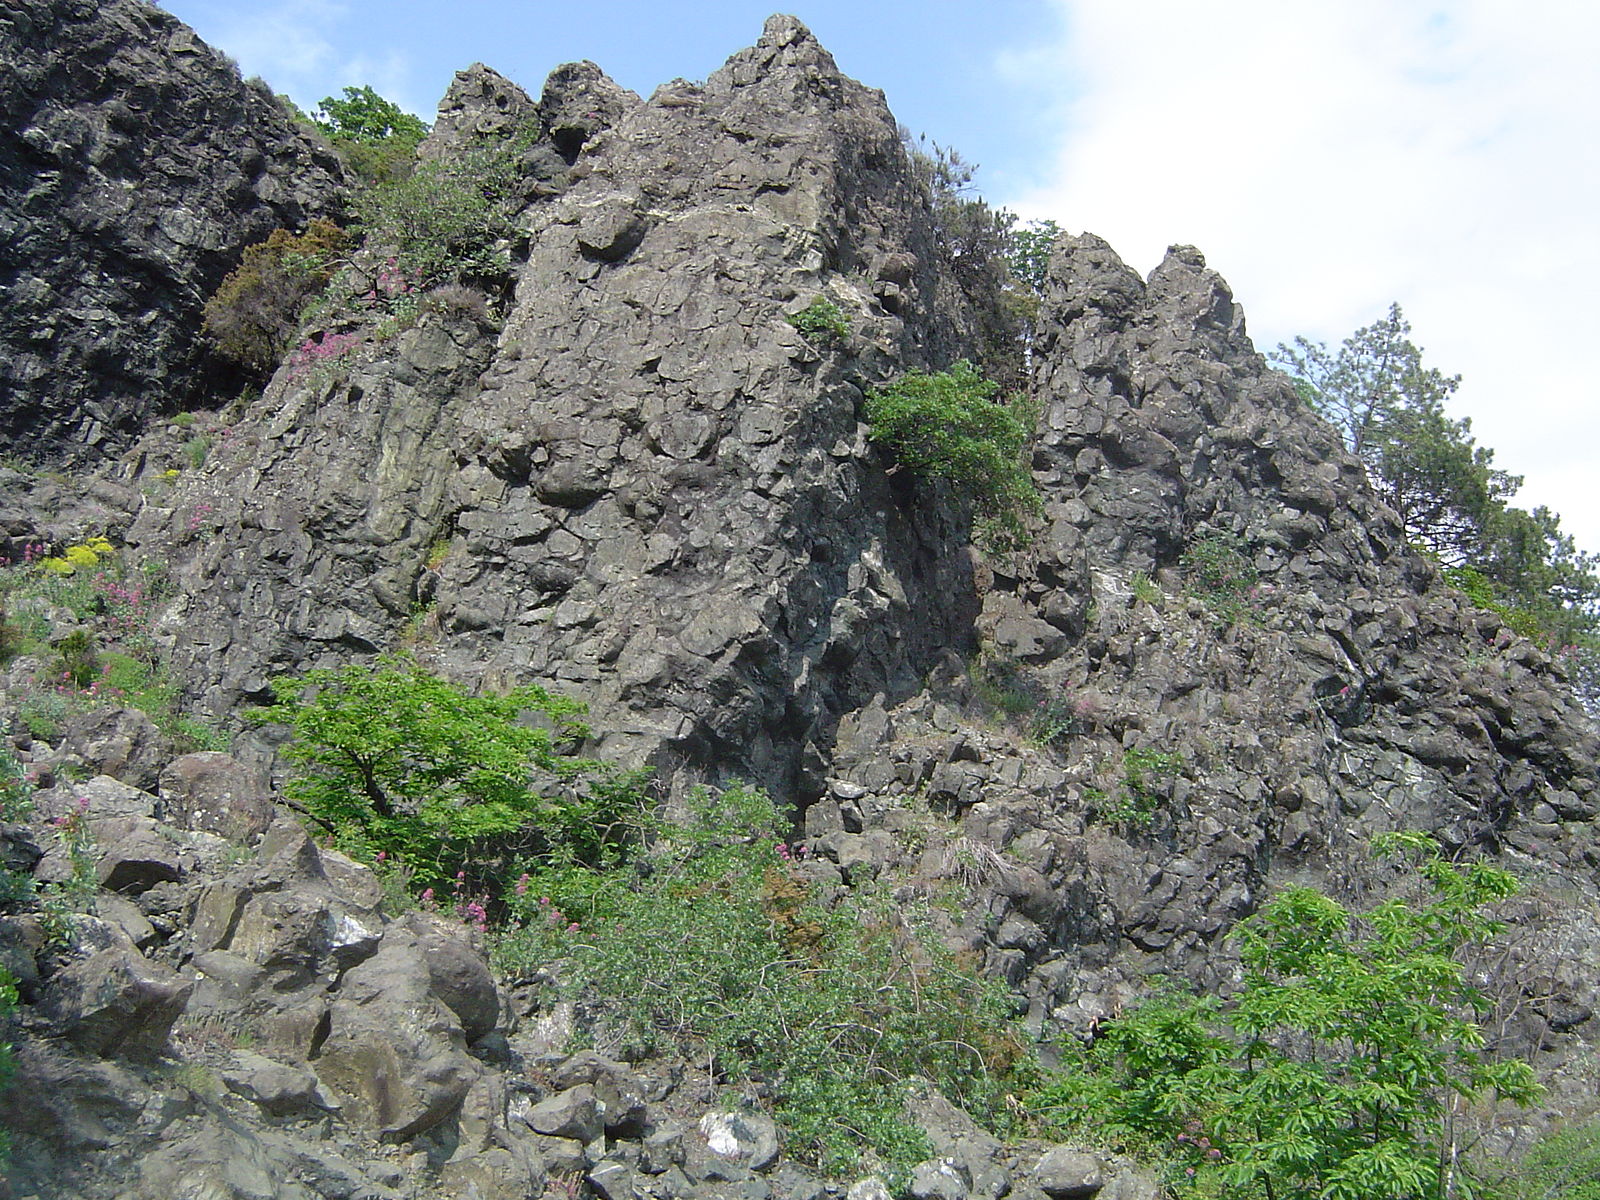 An outcrop of medium-gray rocks that have bulbous texture which are old cooled pillow lavas.